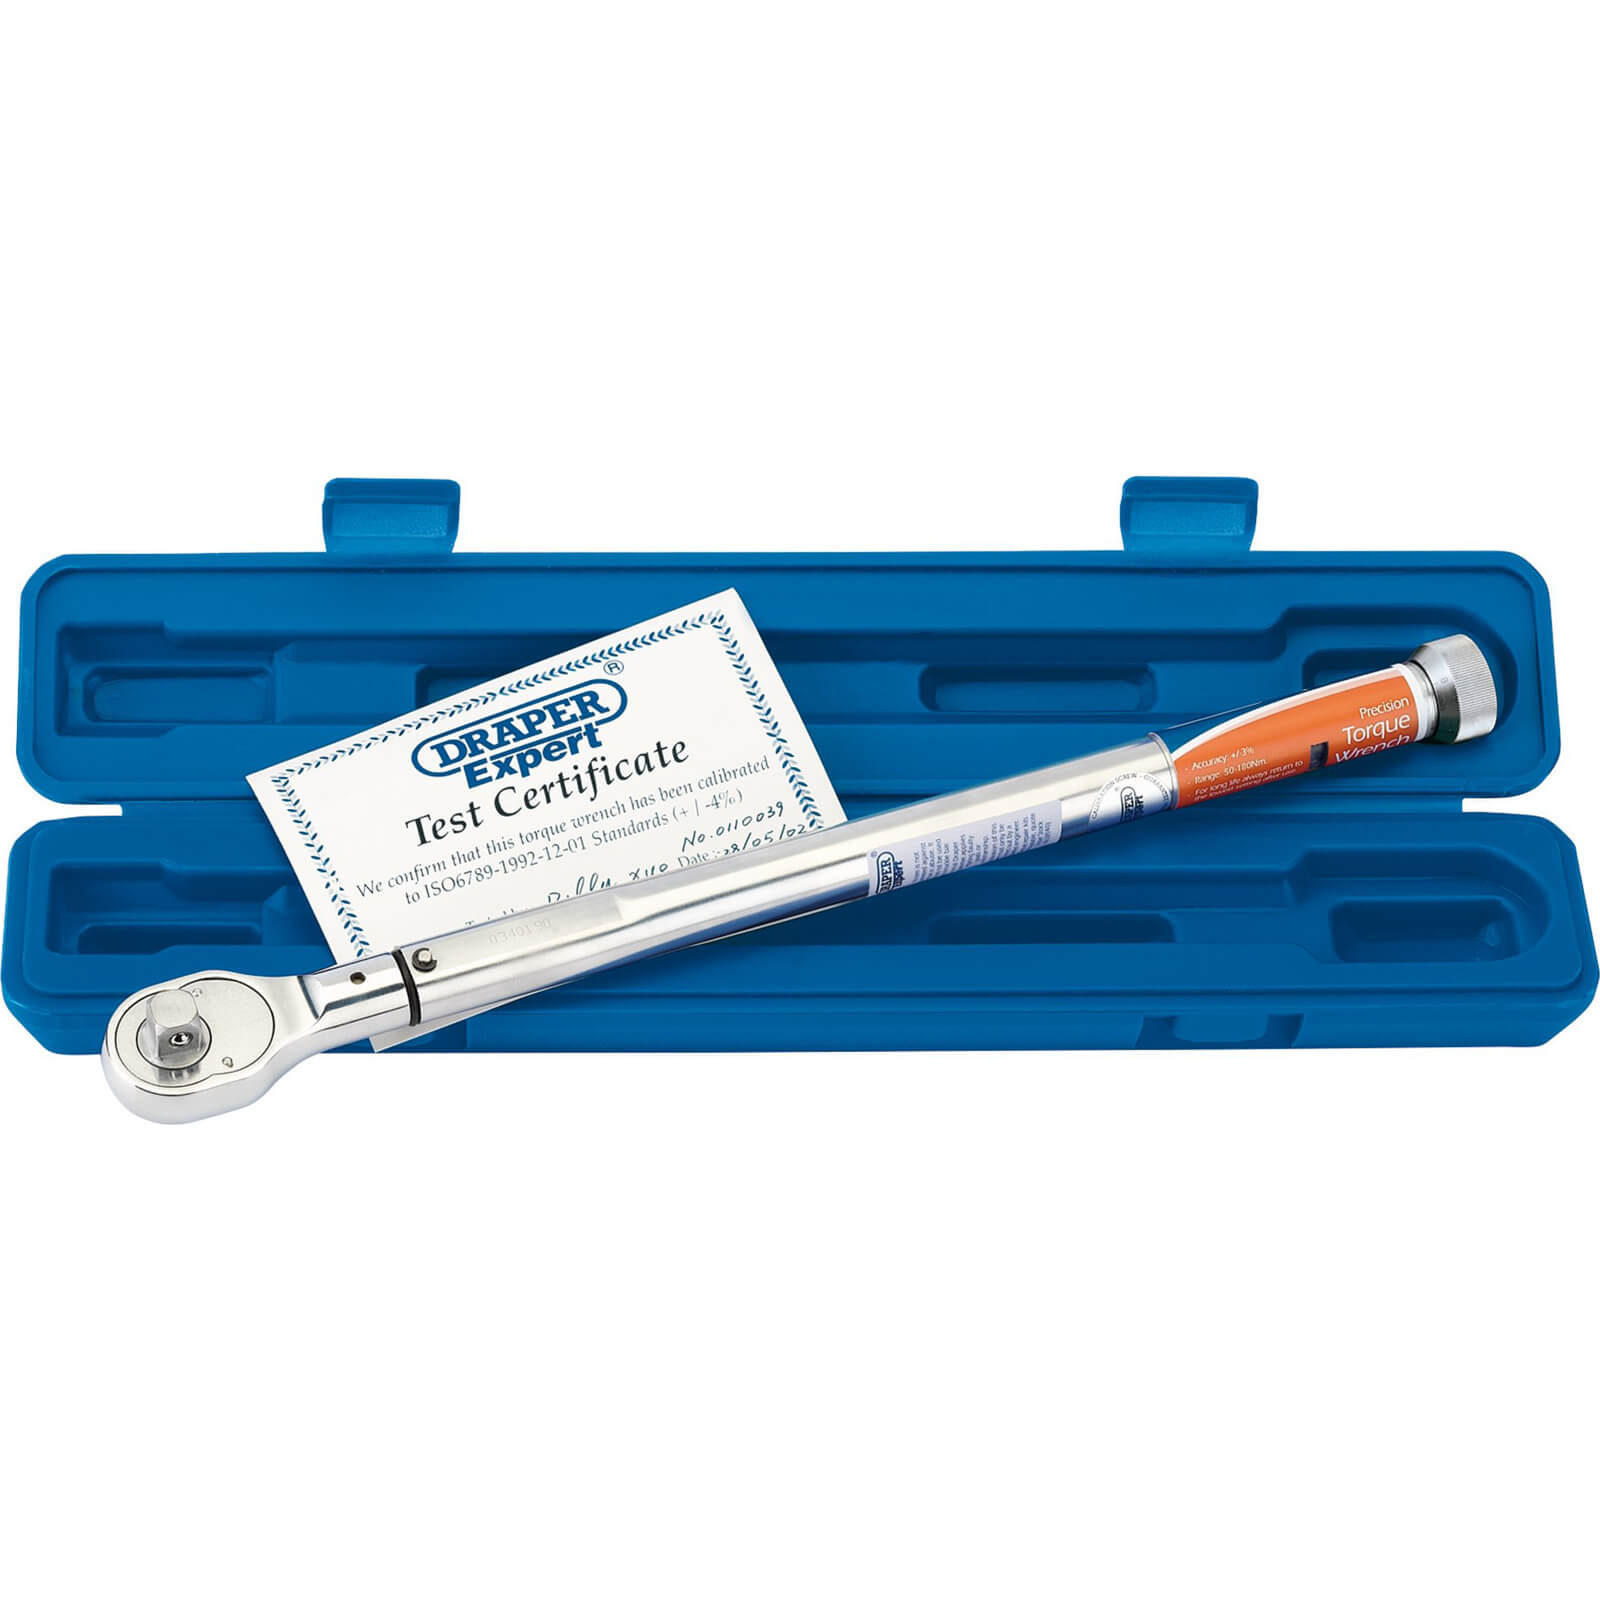 Image of Draper EPTW30-100 1/2" Drive Precision Torque Wrench 1/2" 50Nm - 180Nm